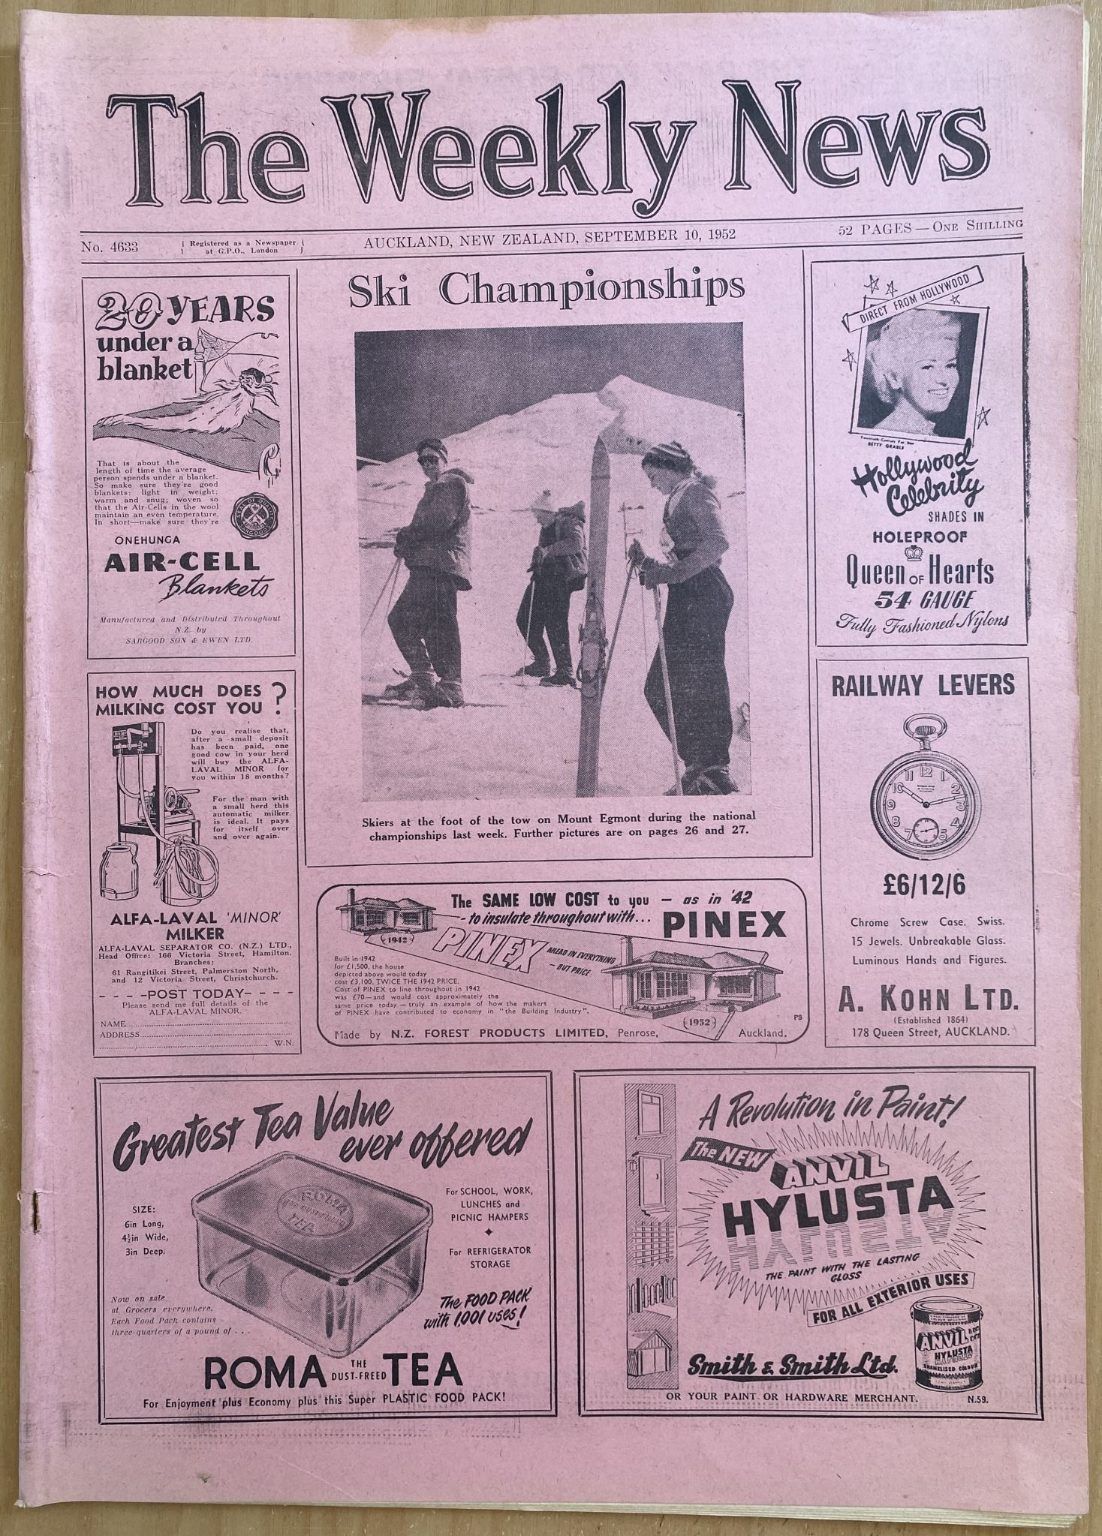 OLD NEWSPAPER: The Weekly News - No. 4633, 10 September 1952